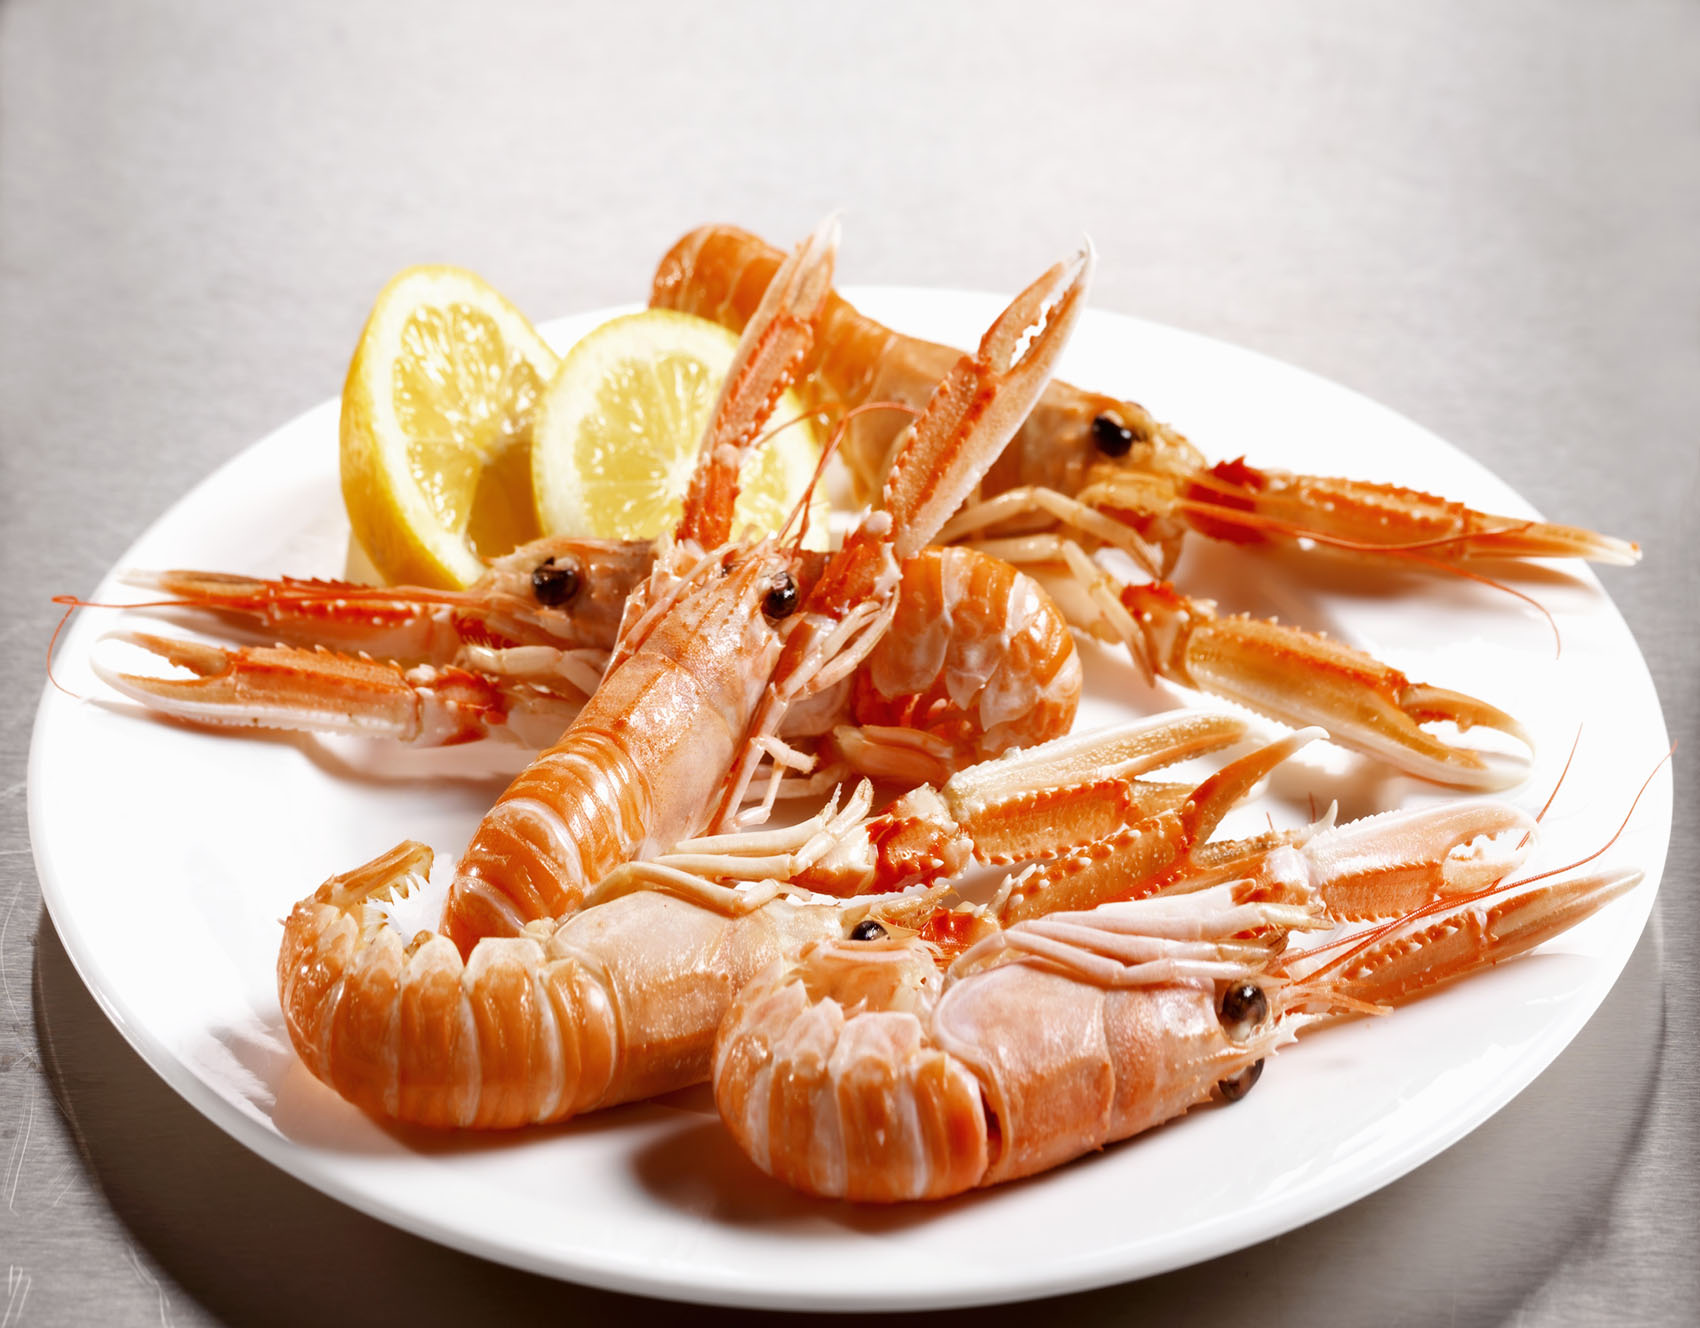 How to choose, clean and cook the prawns